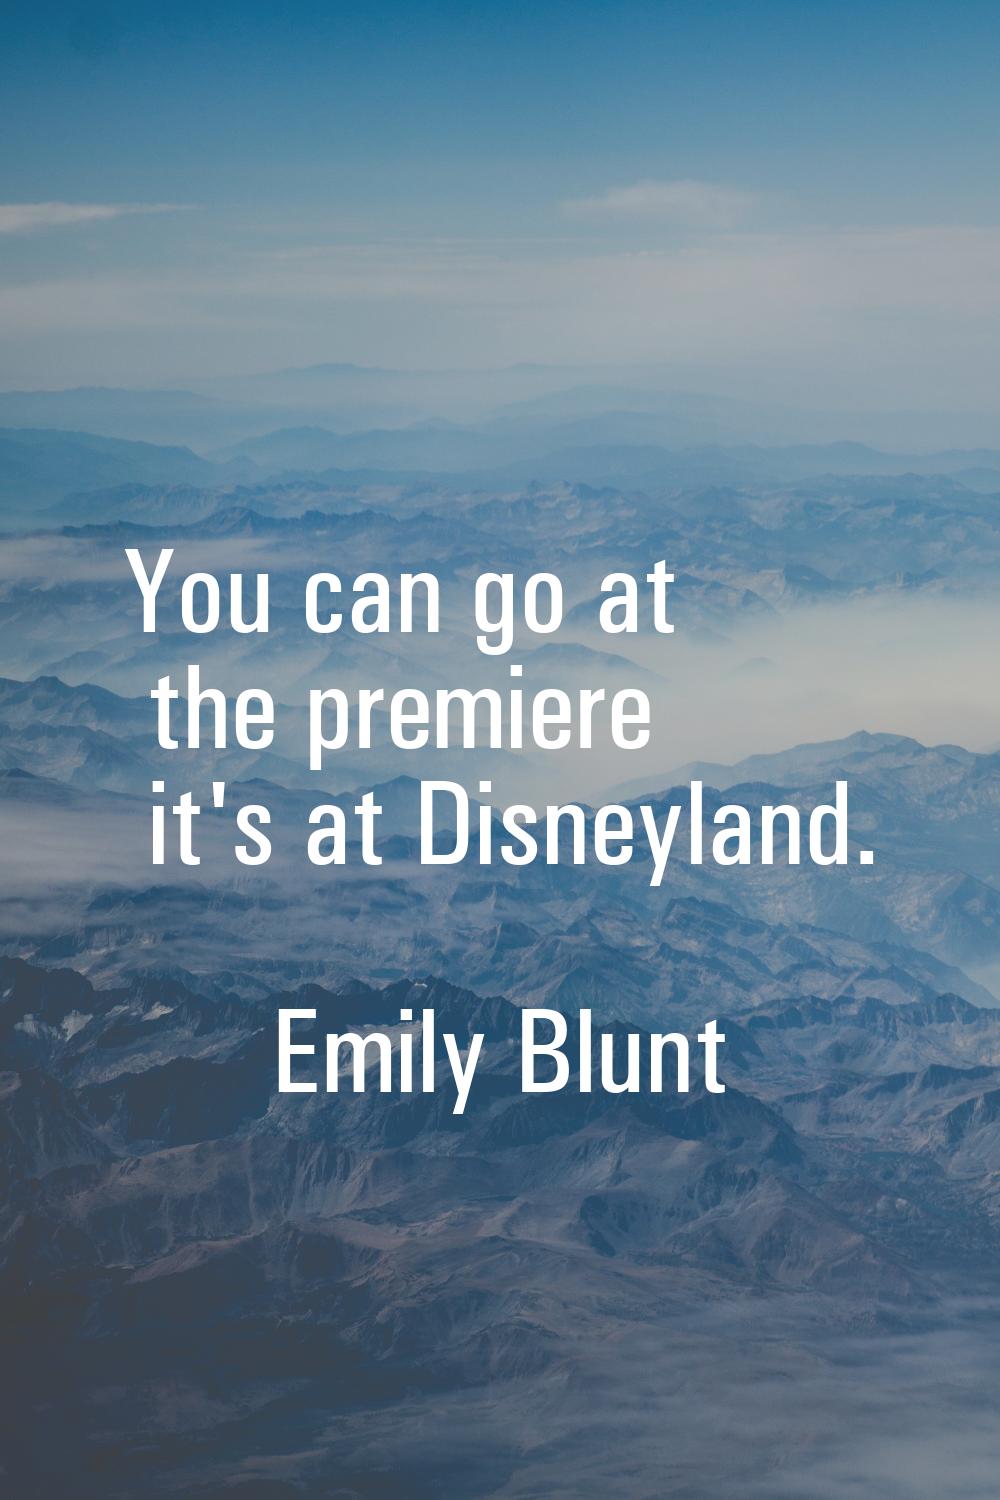 You can go at the premiere it's at Disneyland.